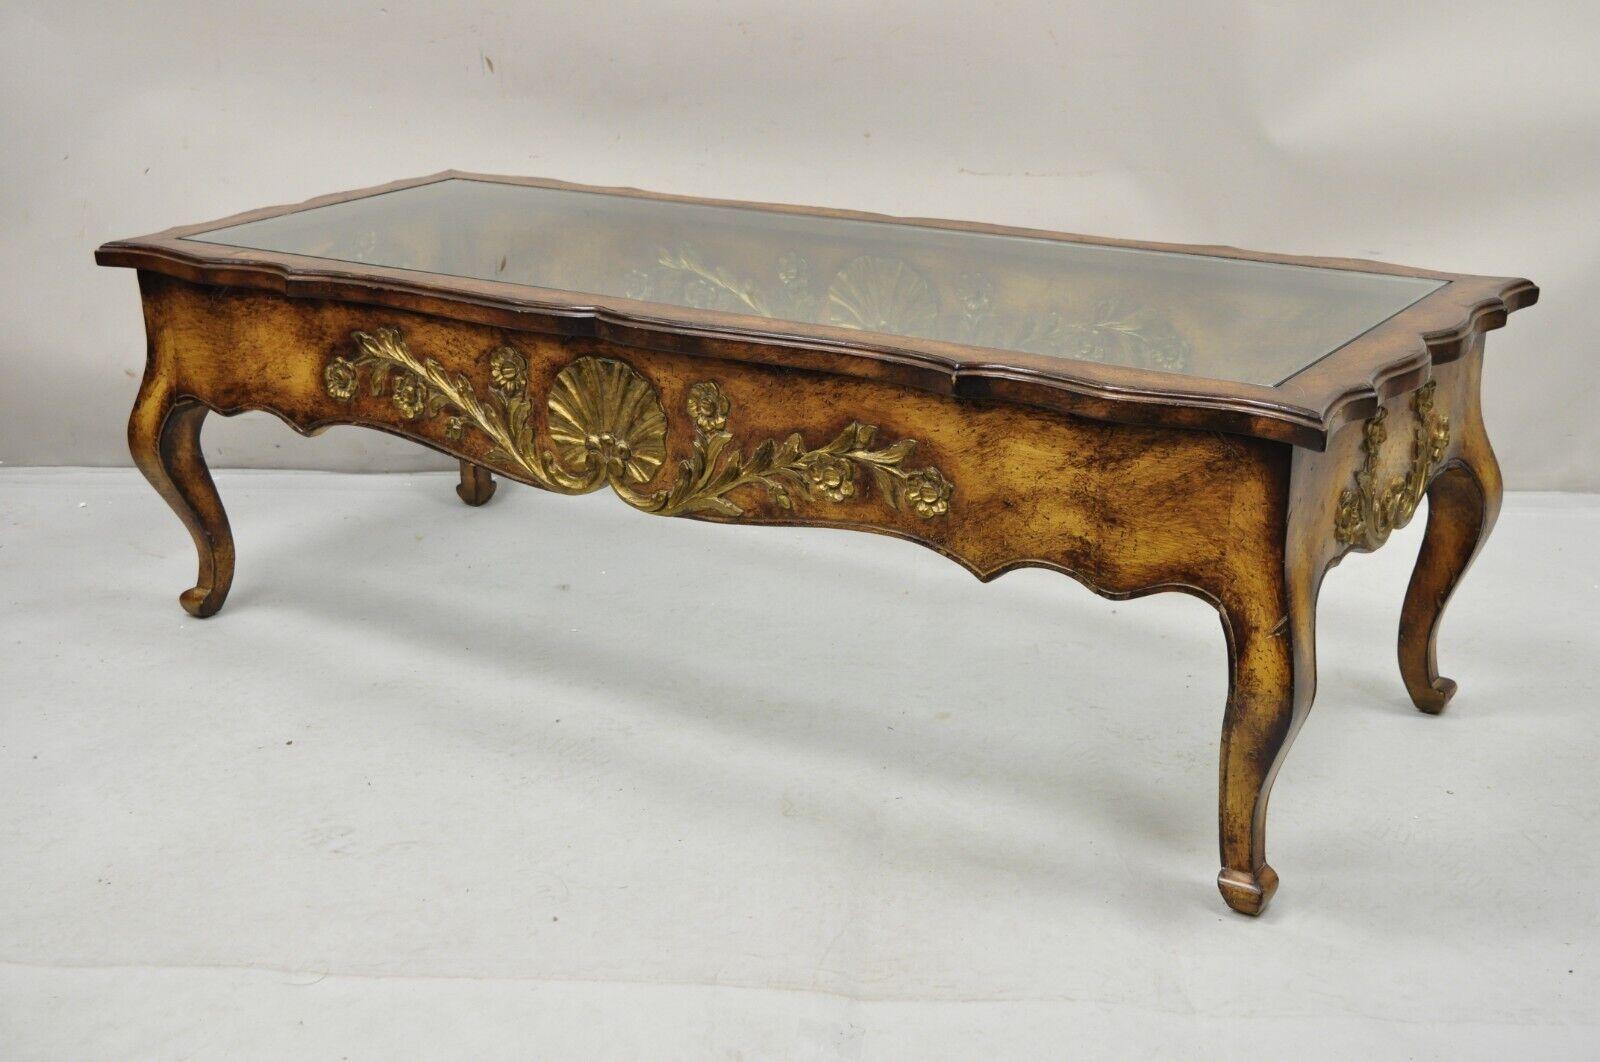 Vintage French Country Provincial Style Shell Carved Walnut Coffee Table. Item features a thick inset glass top, distressed finish, solid wood construction. Circa Late 20th Century. Measurements: 16.5